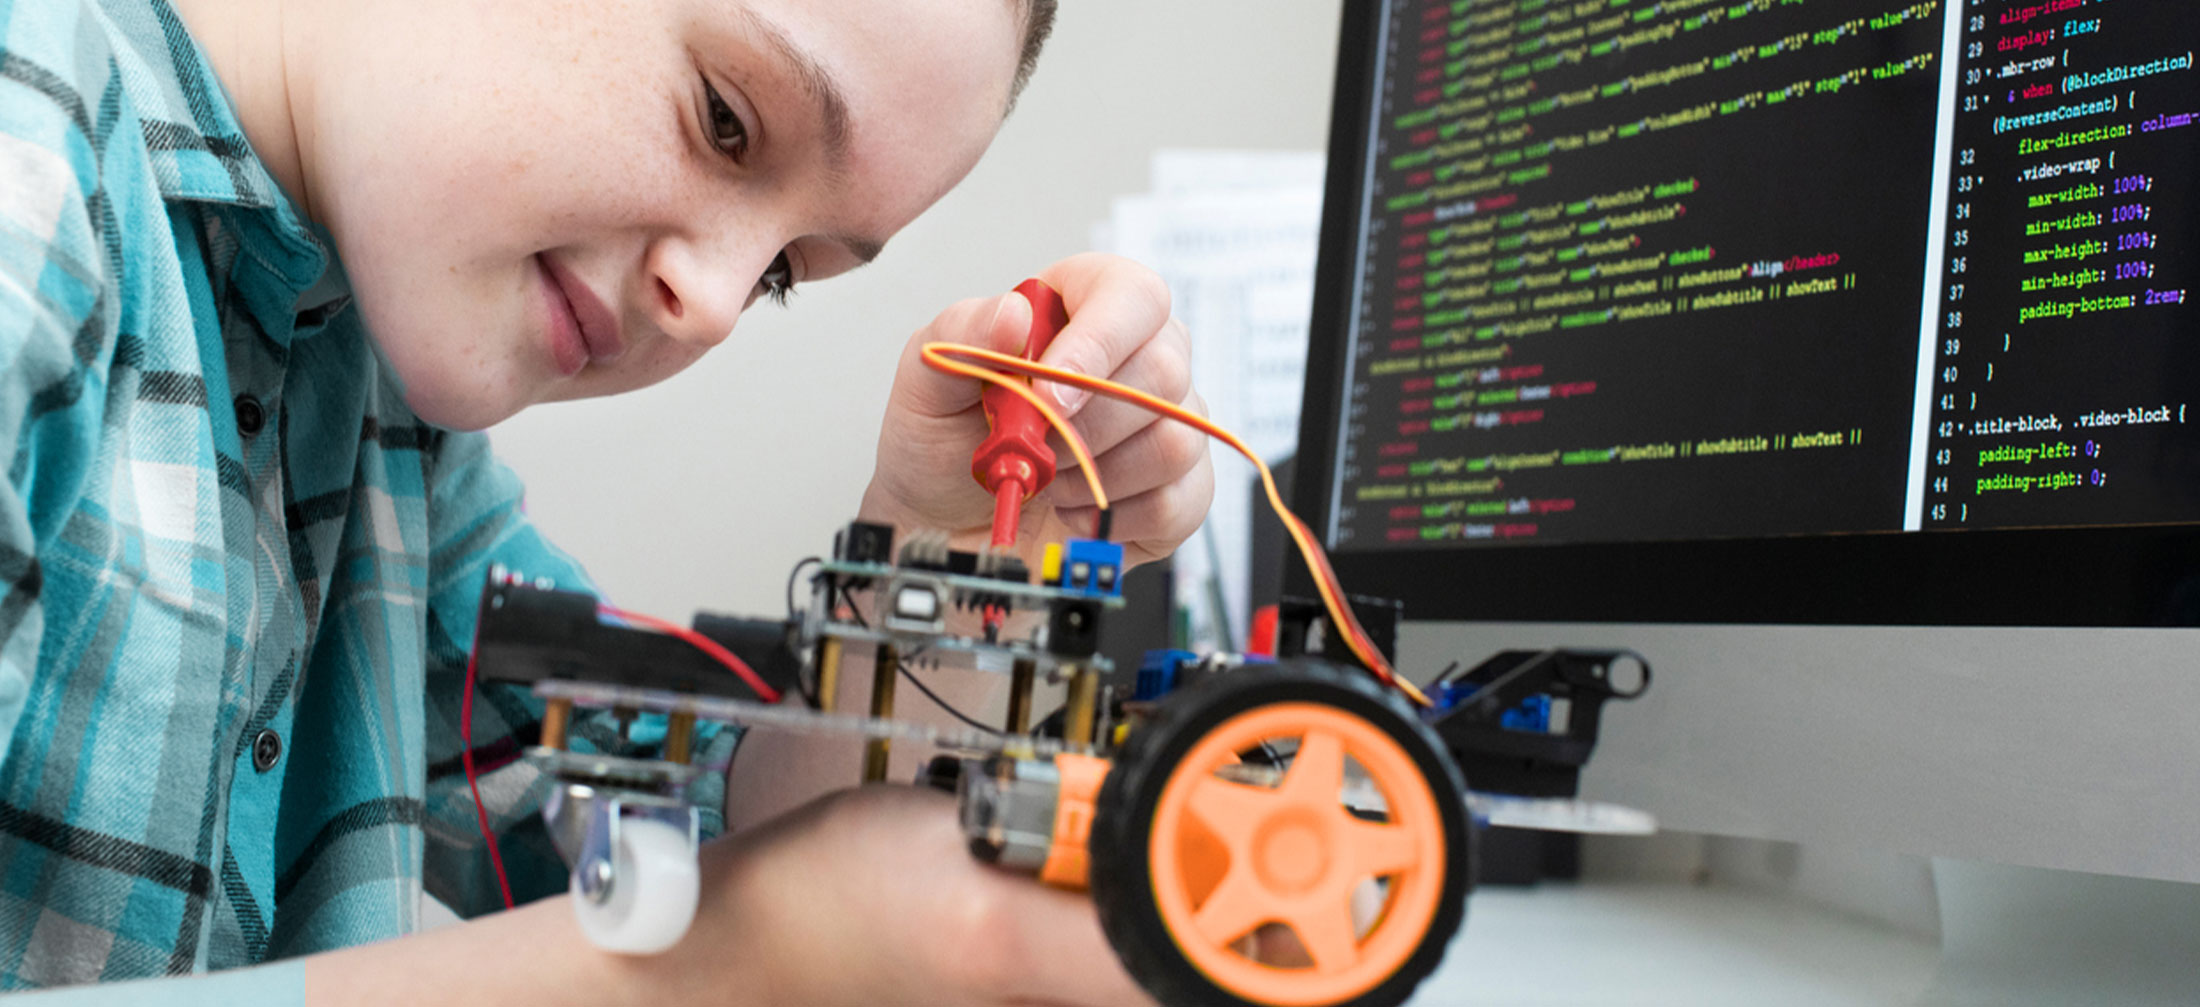 Middle Age school girl works on a robotics project.